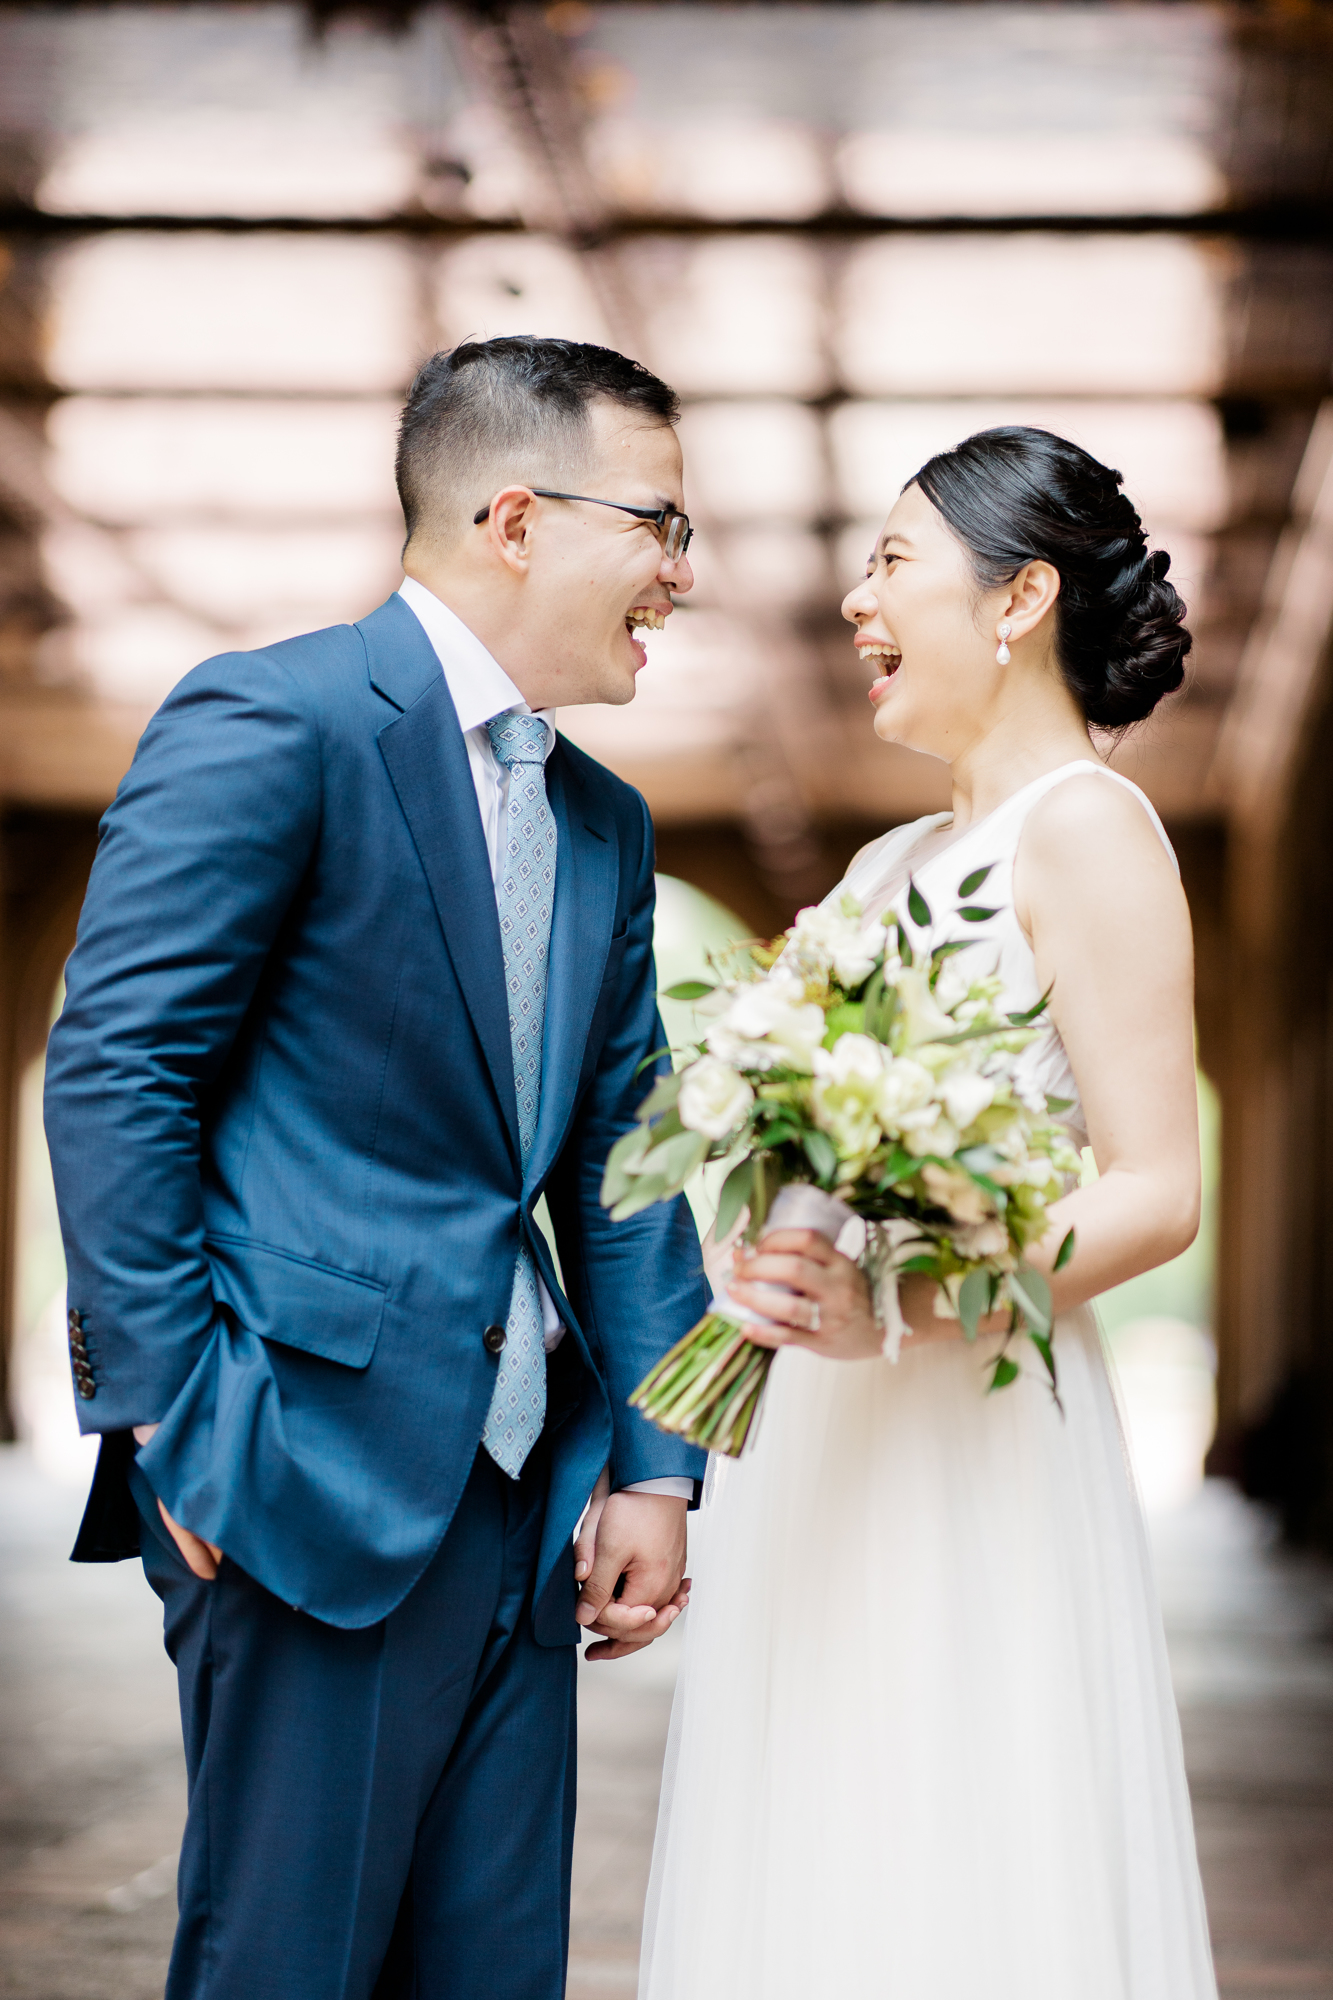 Beautiful Photos of New York Elopement in DUMBO and Central Park